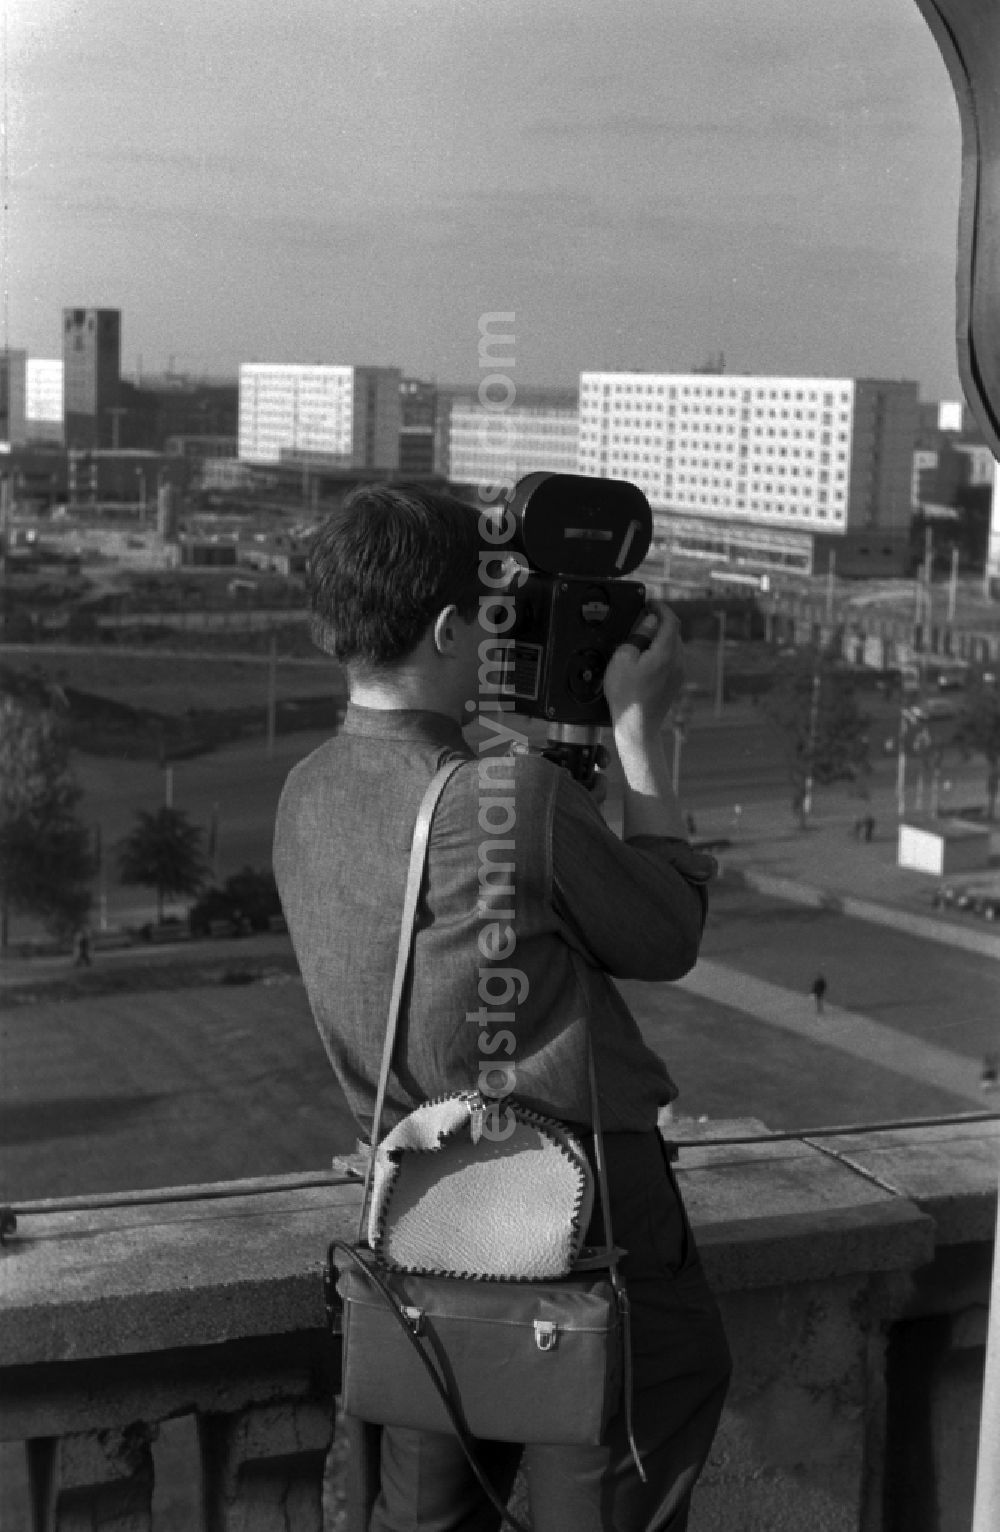 Berlin - Mitte: A young man standing on a balcony and filmed with a 16 mm film camera in Berlin - Mitte